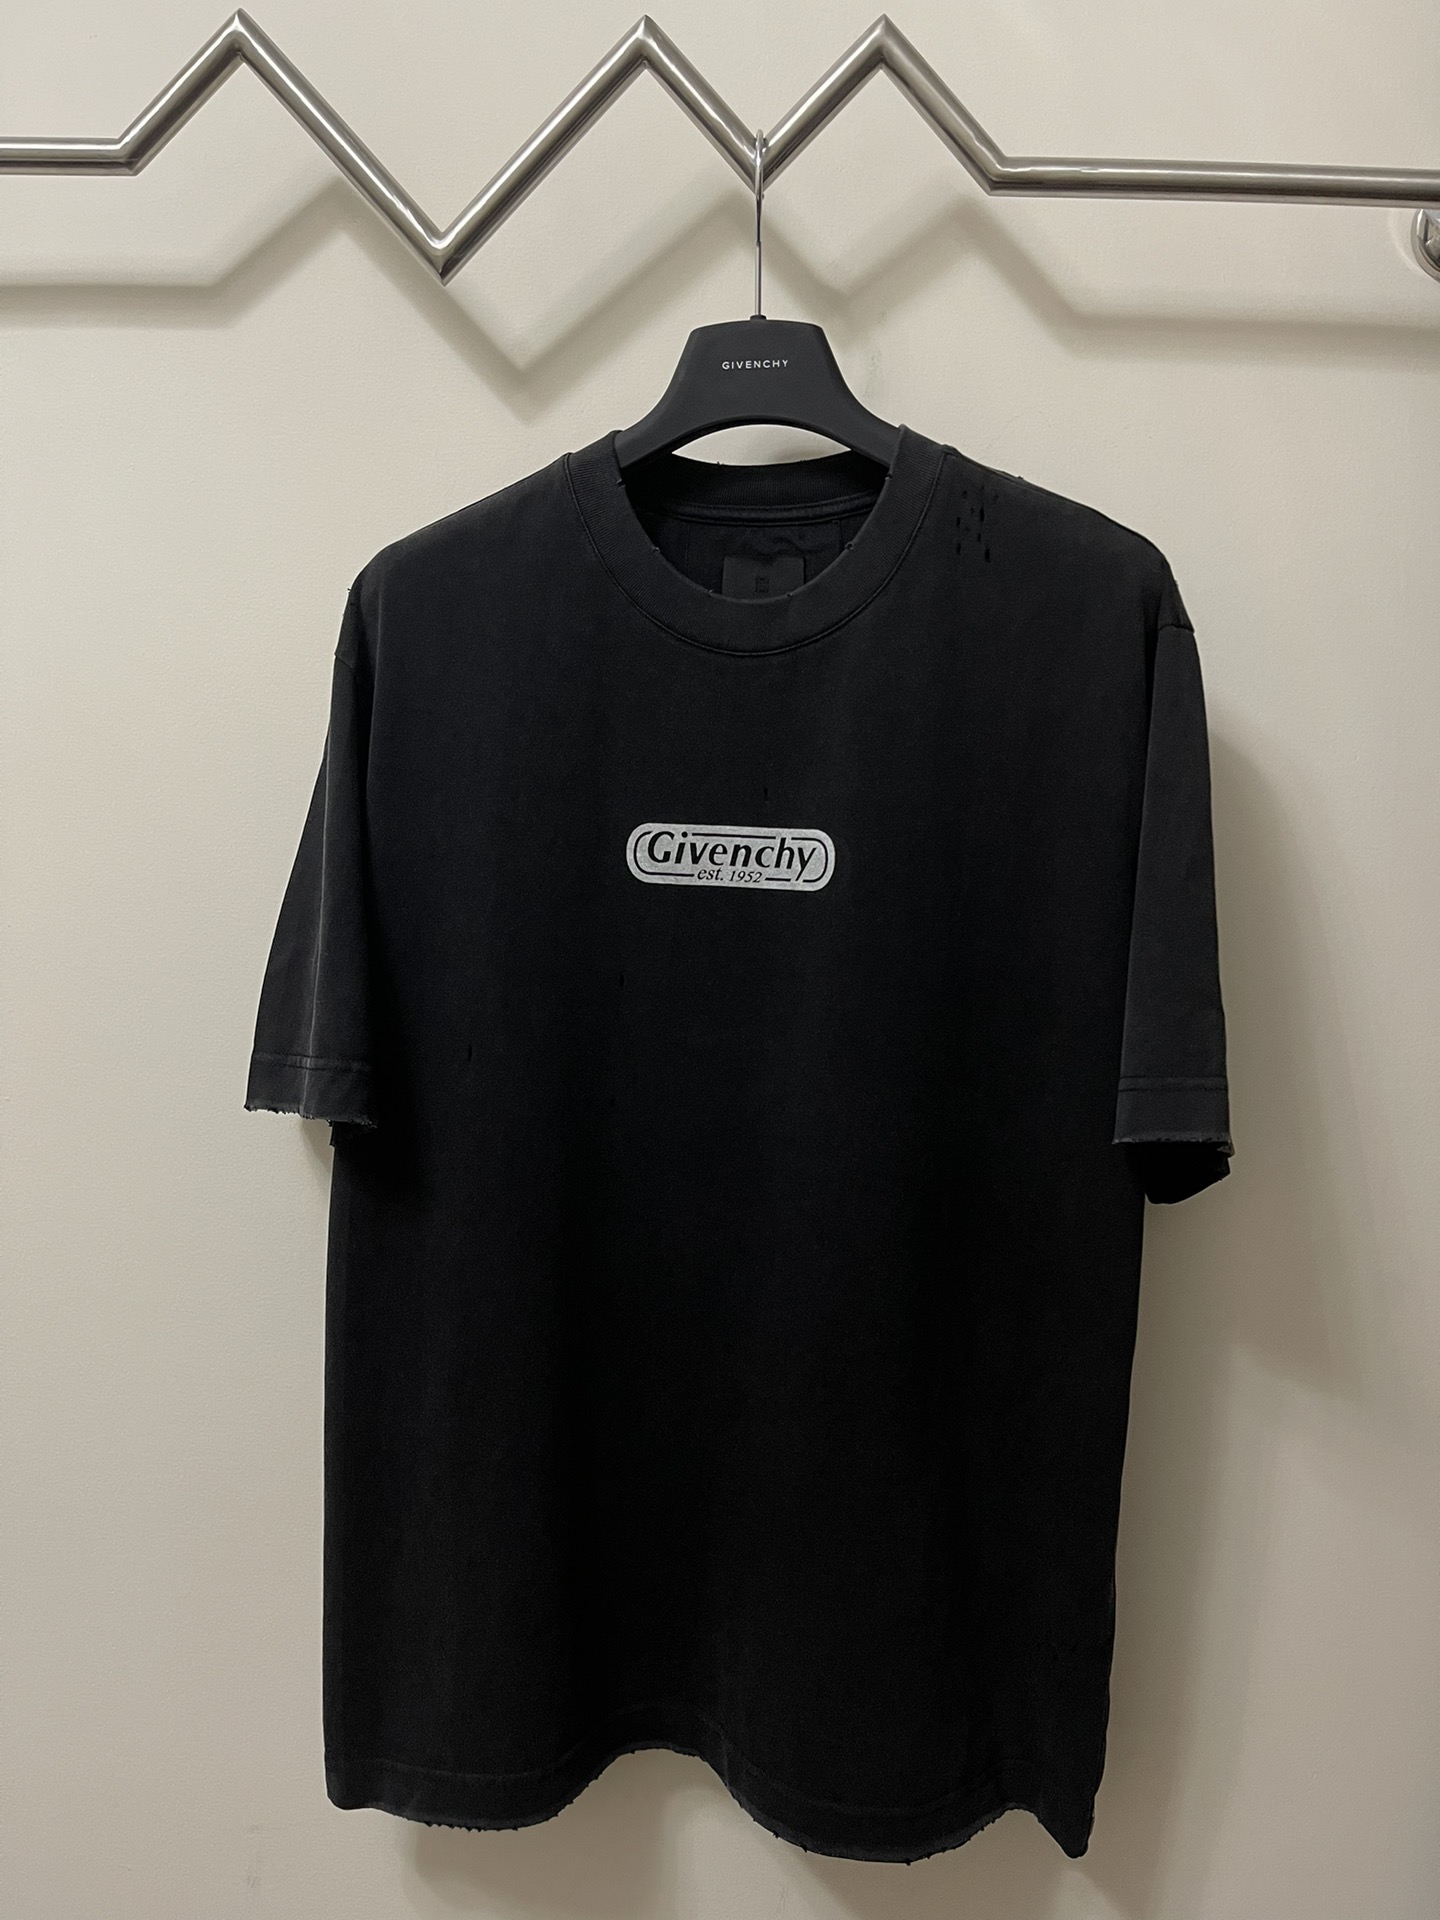 Givenchy Copy
 Clothing T-Shirt Black Printing Unisex Cotton Mercerized Spring/Summer Collection Short Sleeve